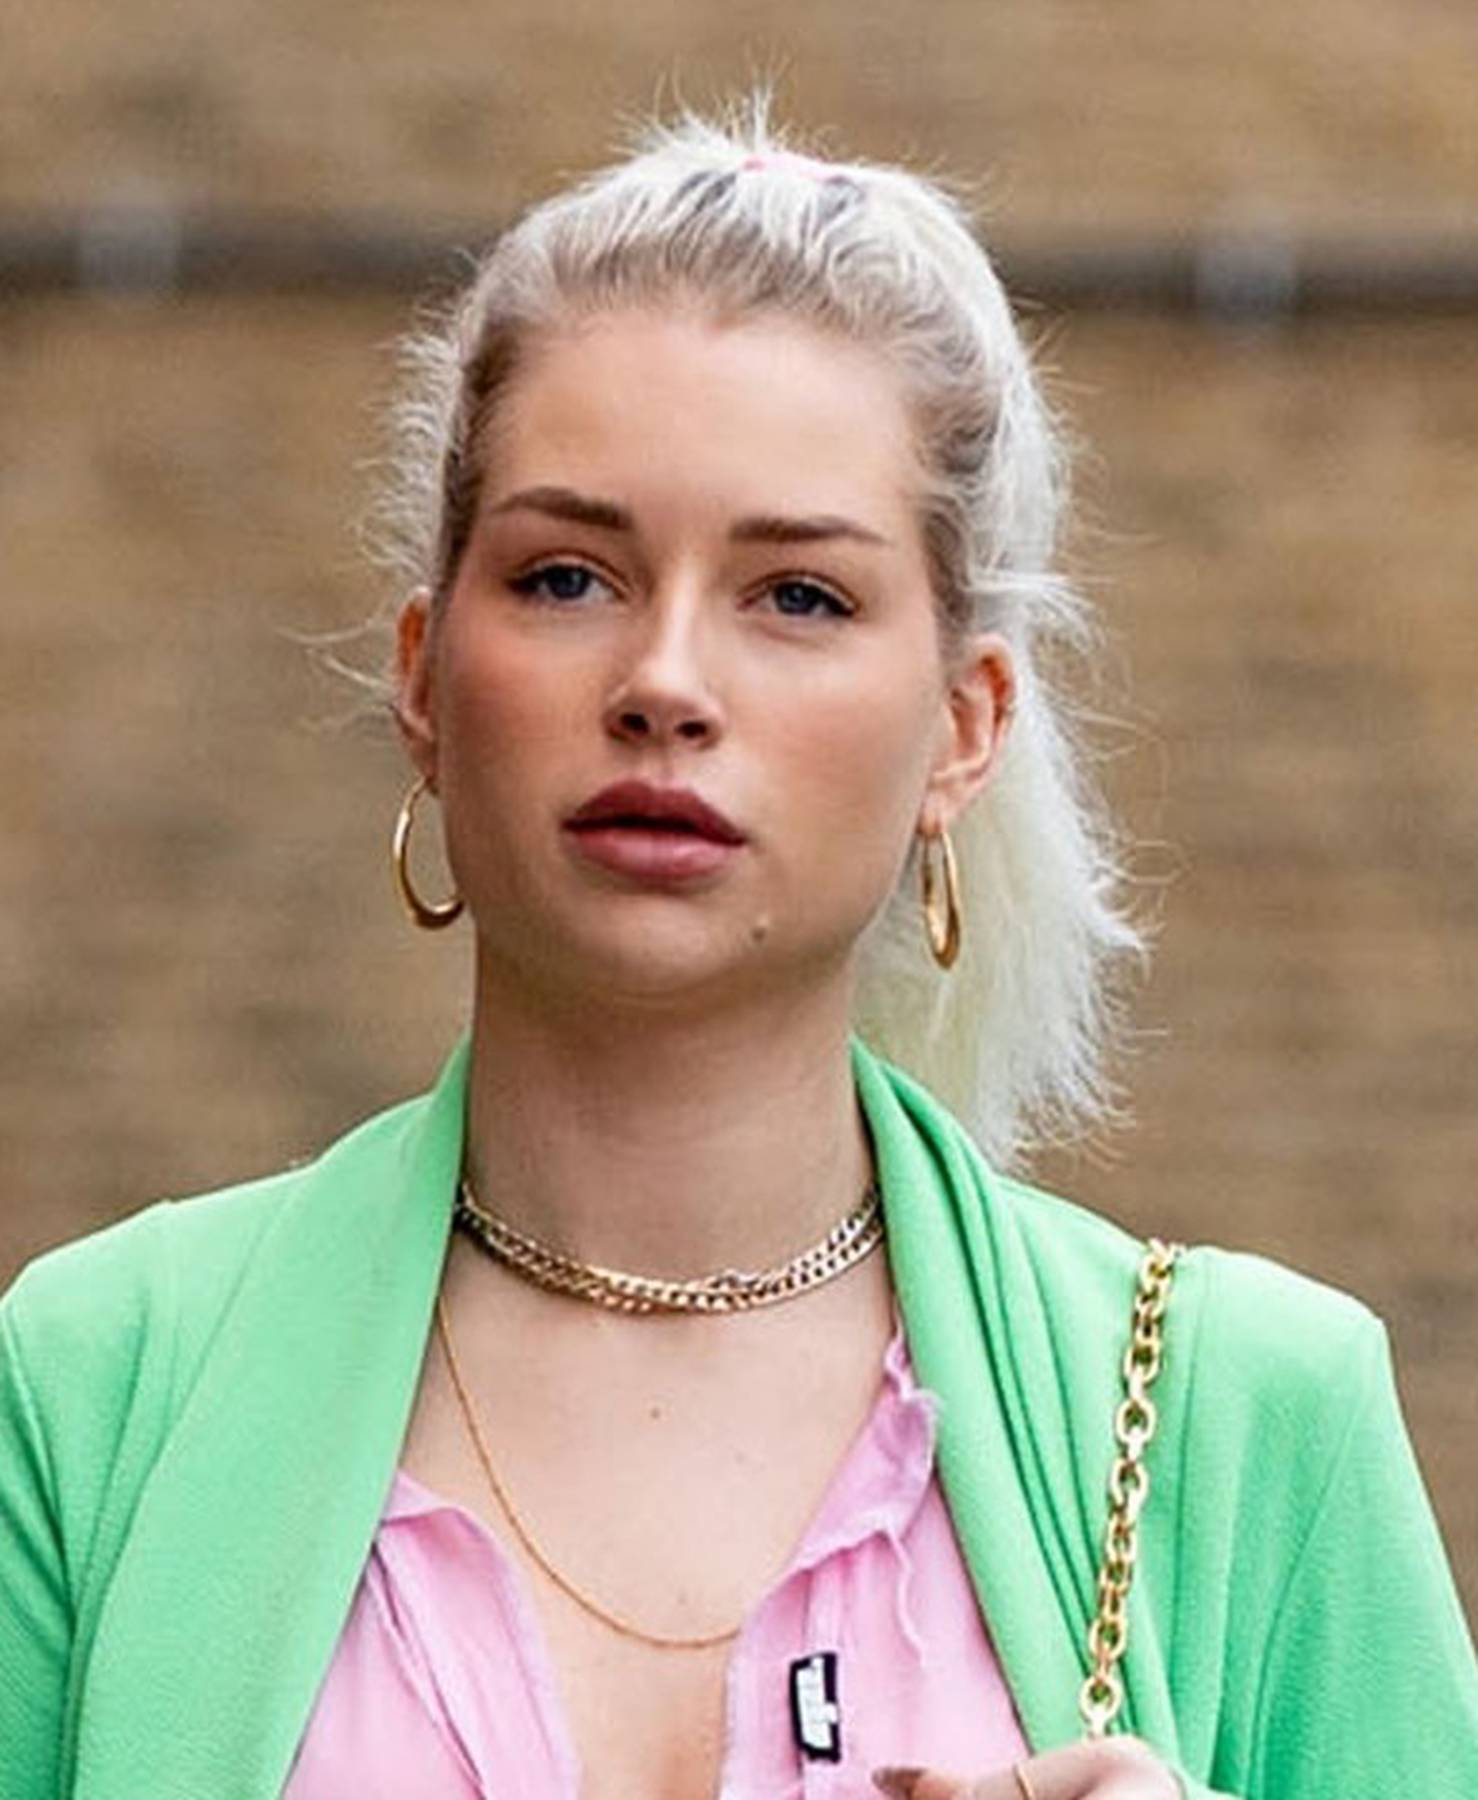 Lottie Moss looks chic and stylish in a PrettyLittleThing Green suit and a sheer pink shirt from the brand. *PICTURES TAKEN ON THE 13/09/21*